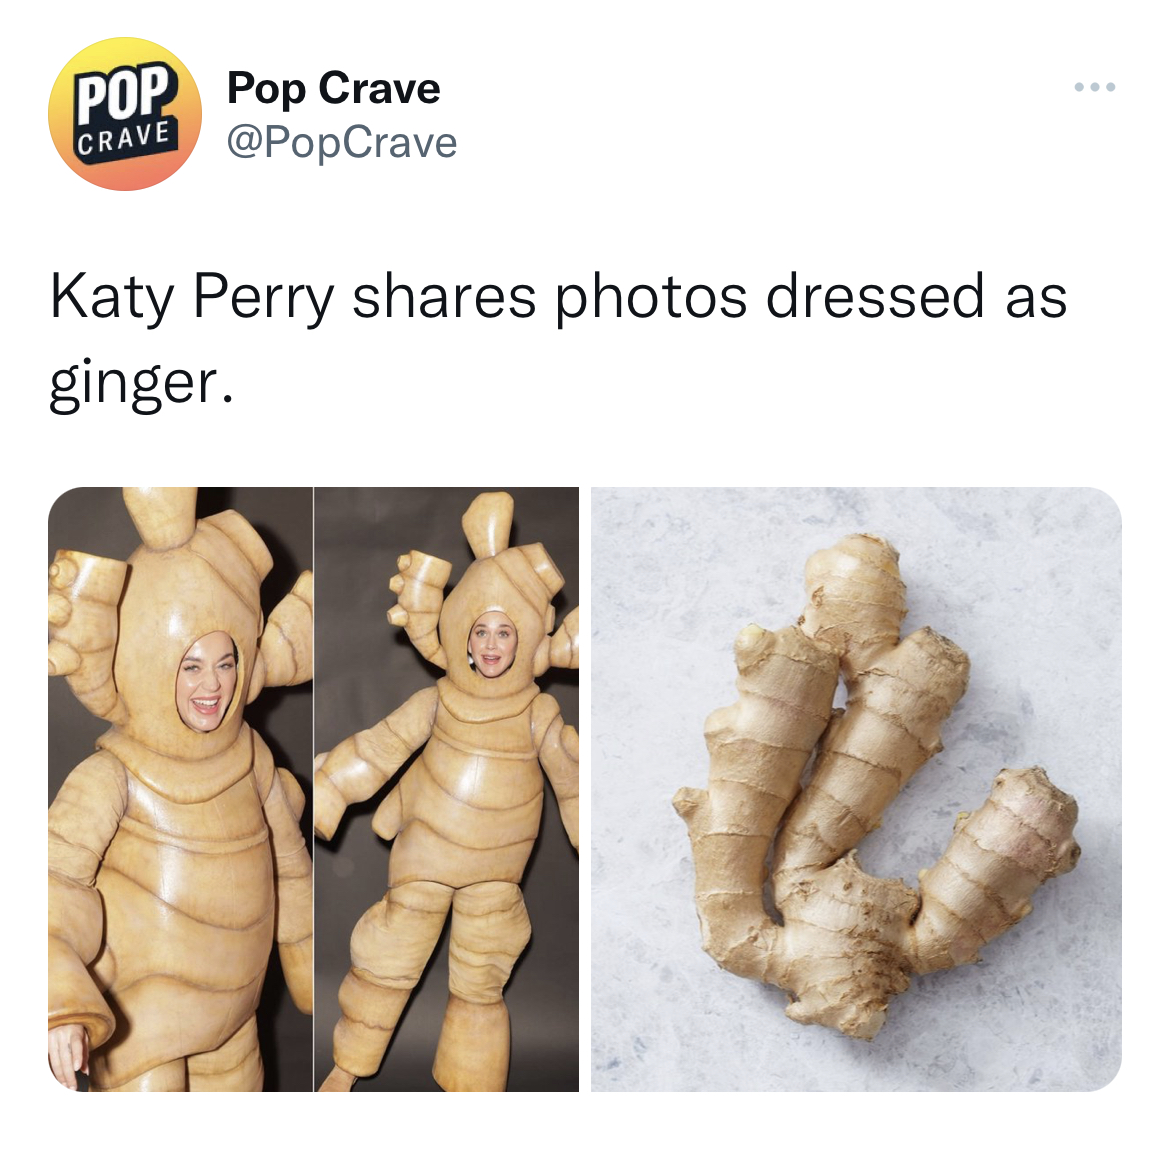 tweets dunking on celebs - ginger root - Pop Pop Crave Crave Katy Perry photos ressed as ginger.